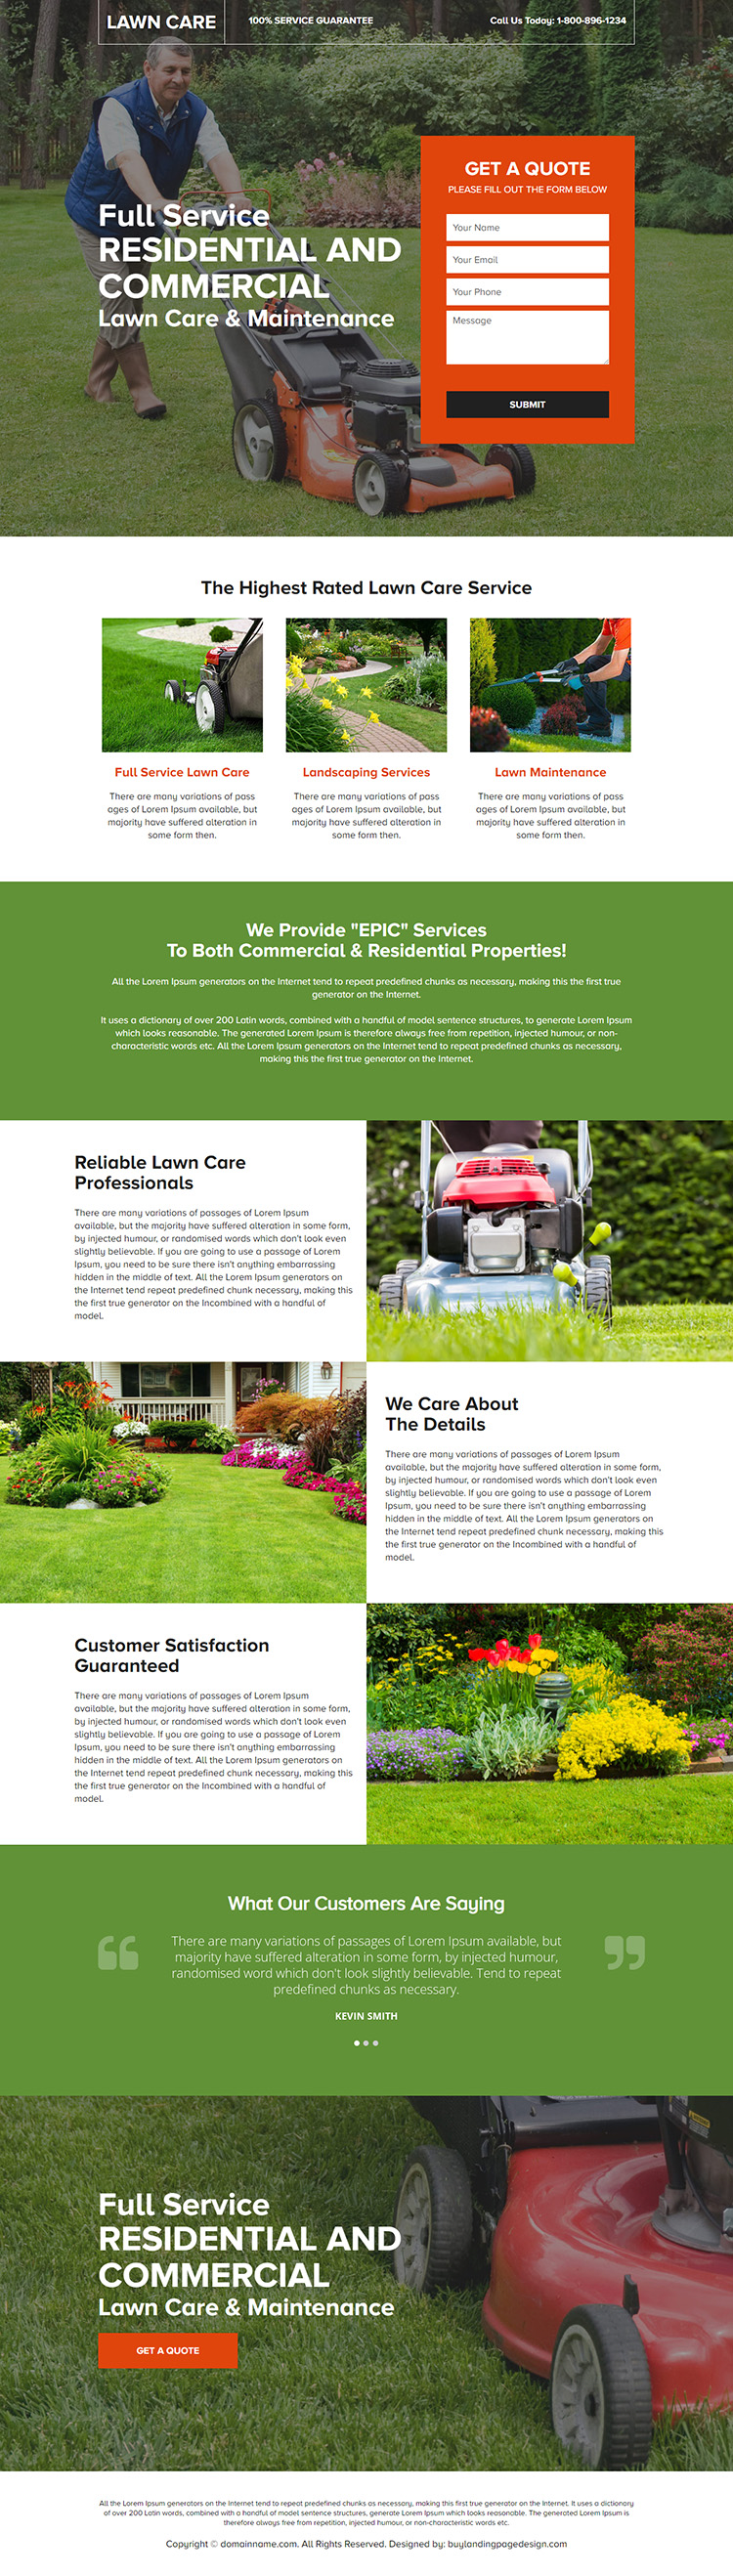 lawn care and maintenance lead capture landing page